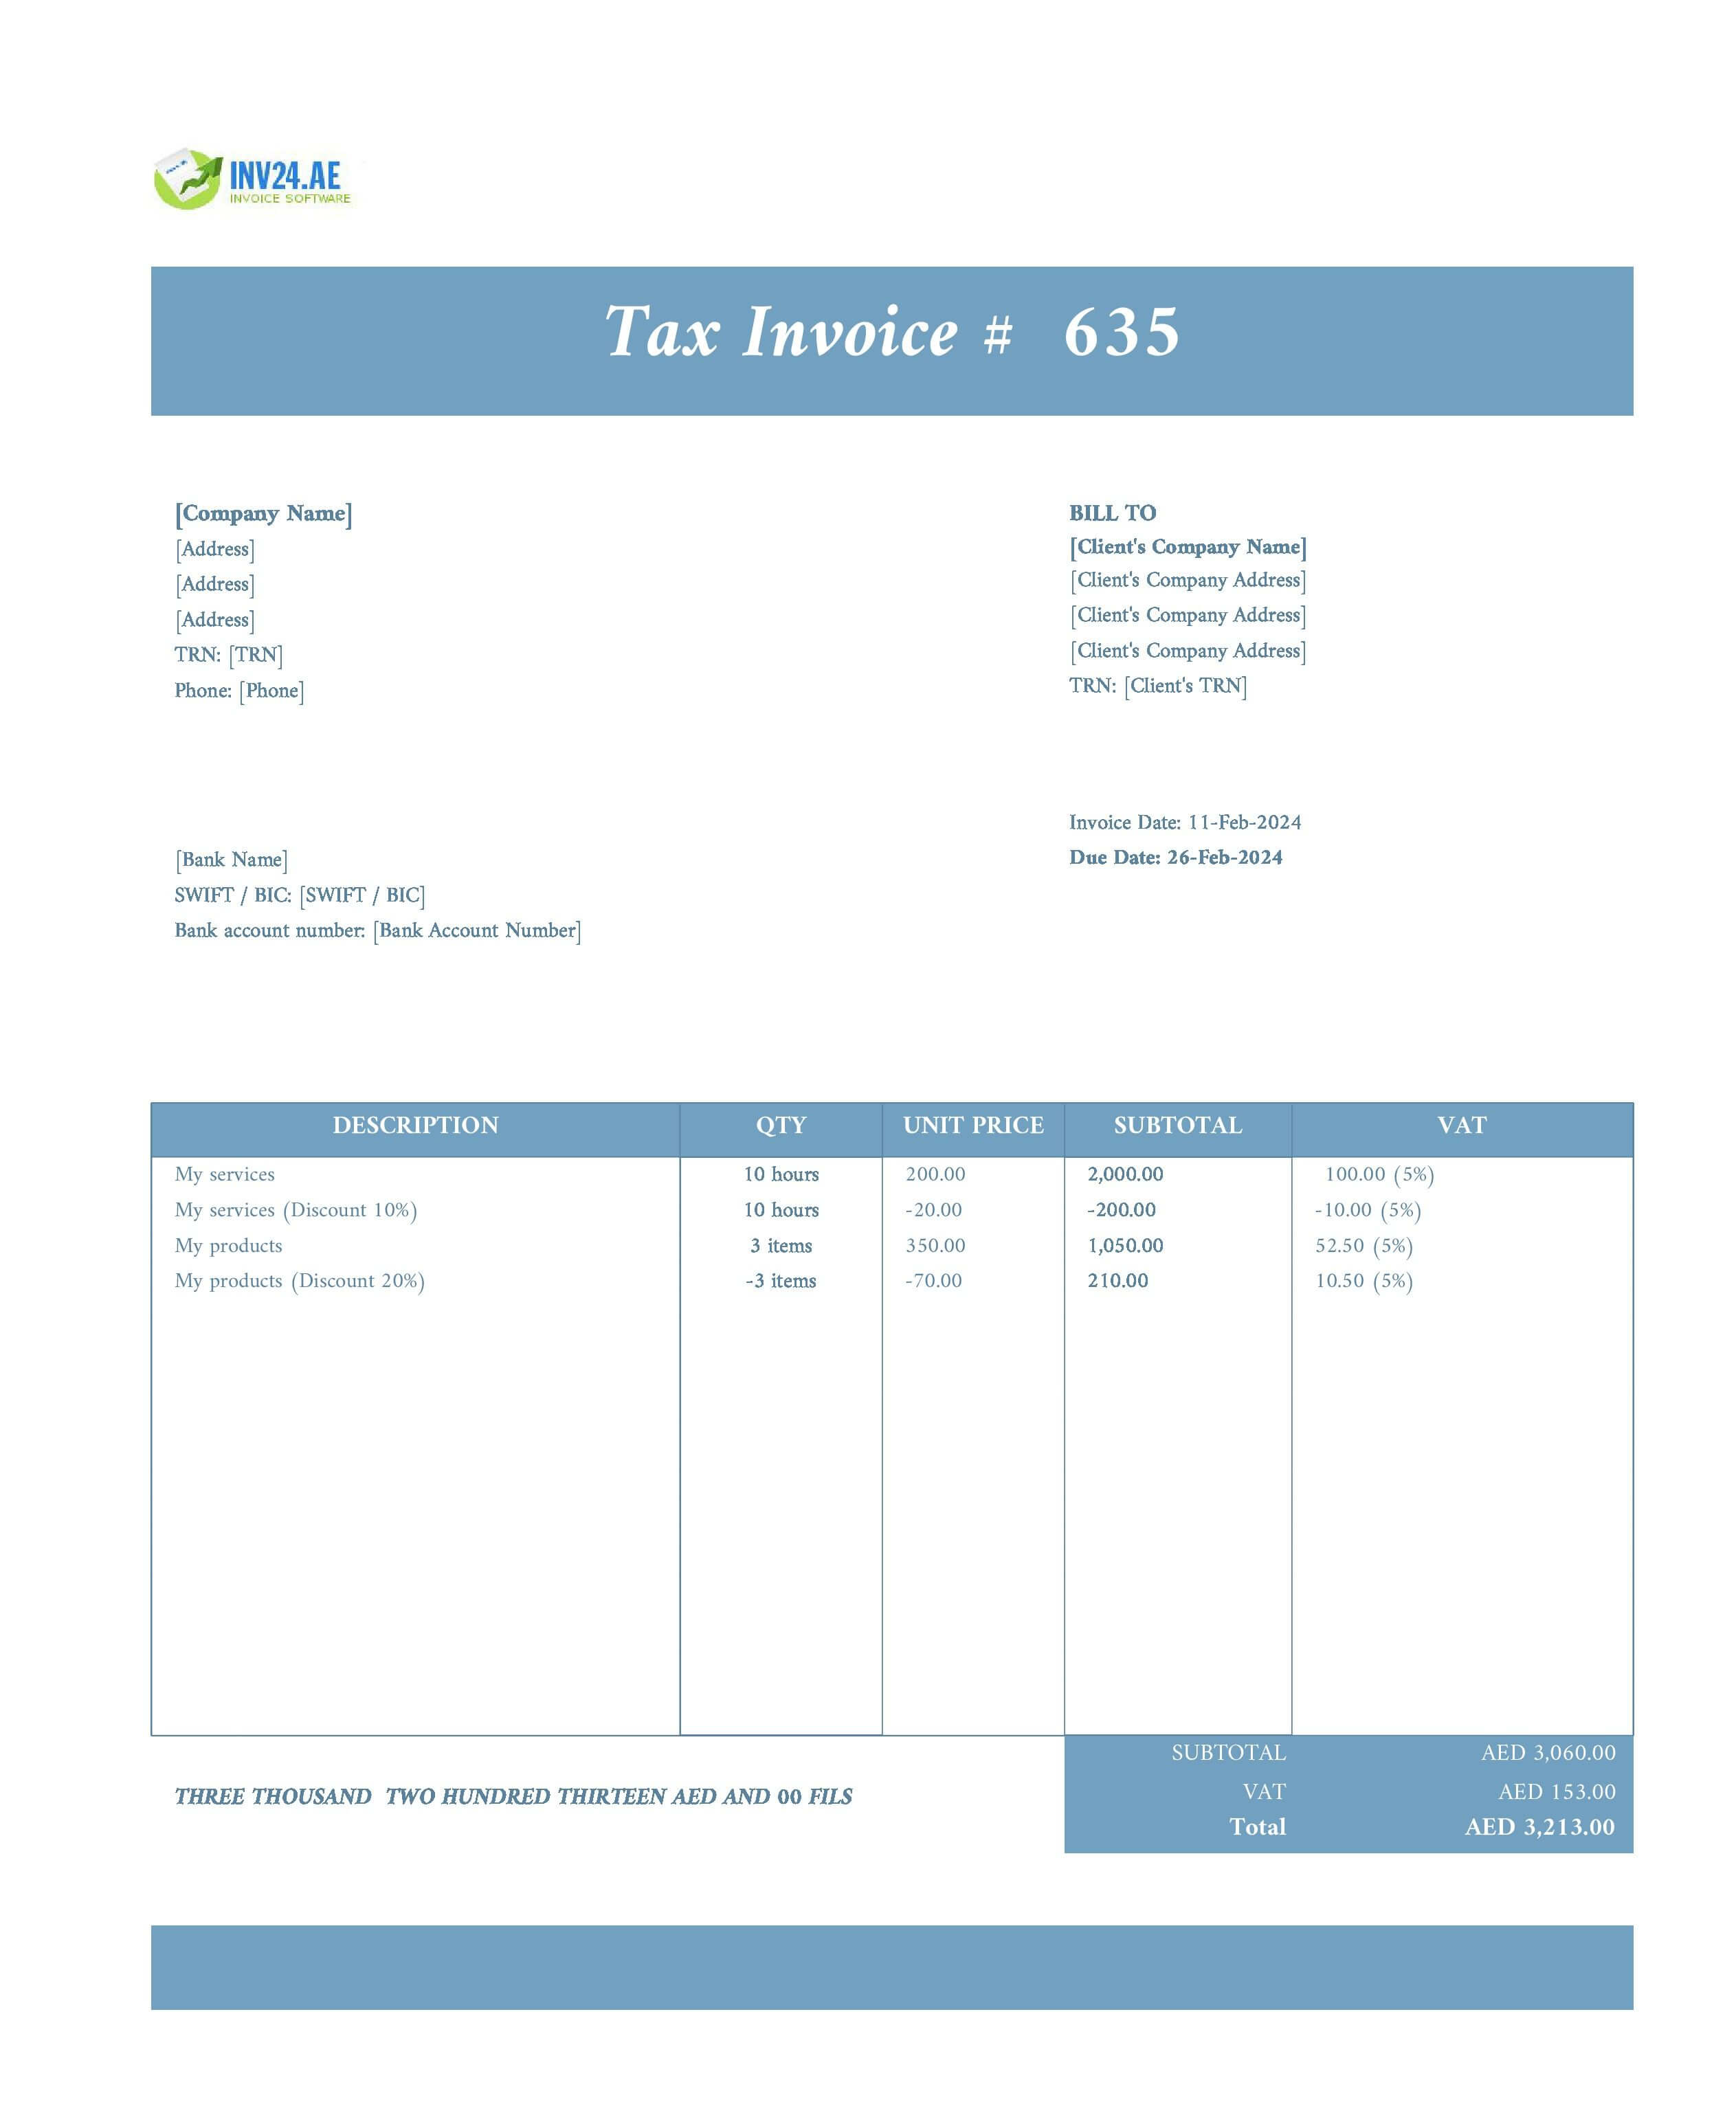 Invoice with discount example